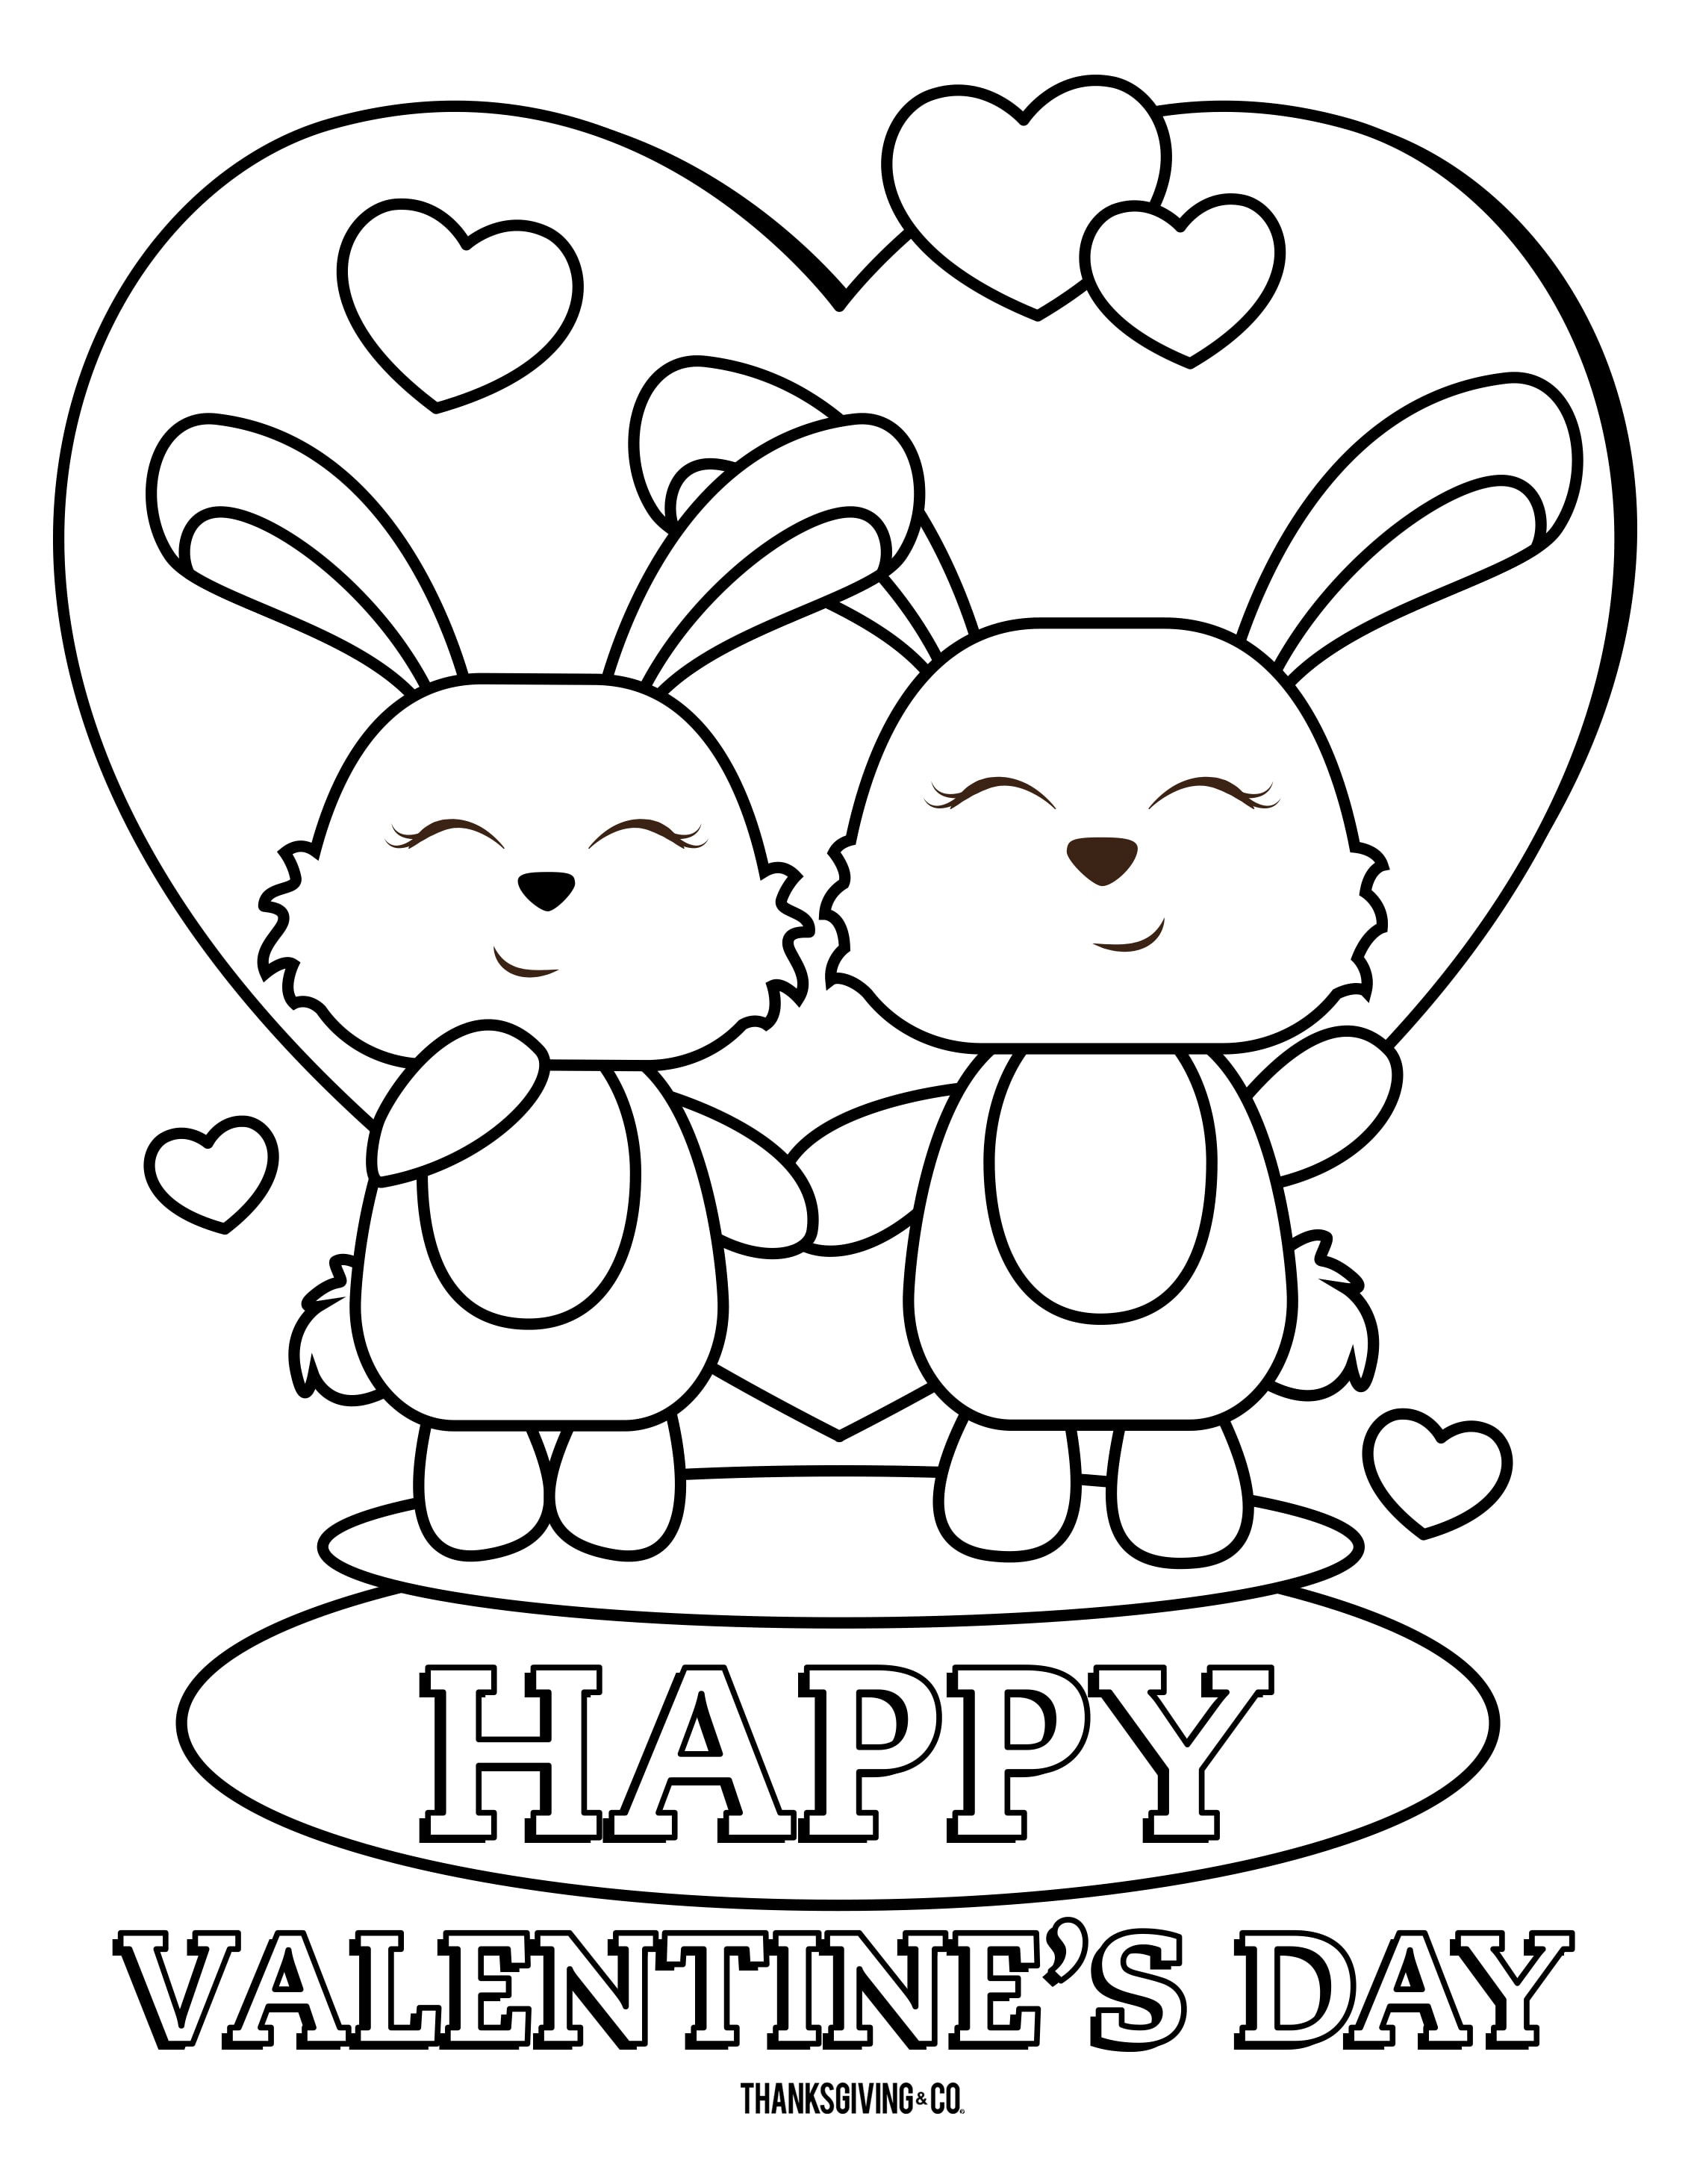 4 Free Valentine S Day Coloring Pages For Kids